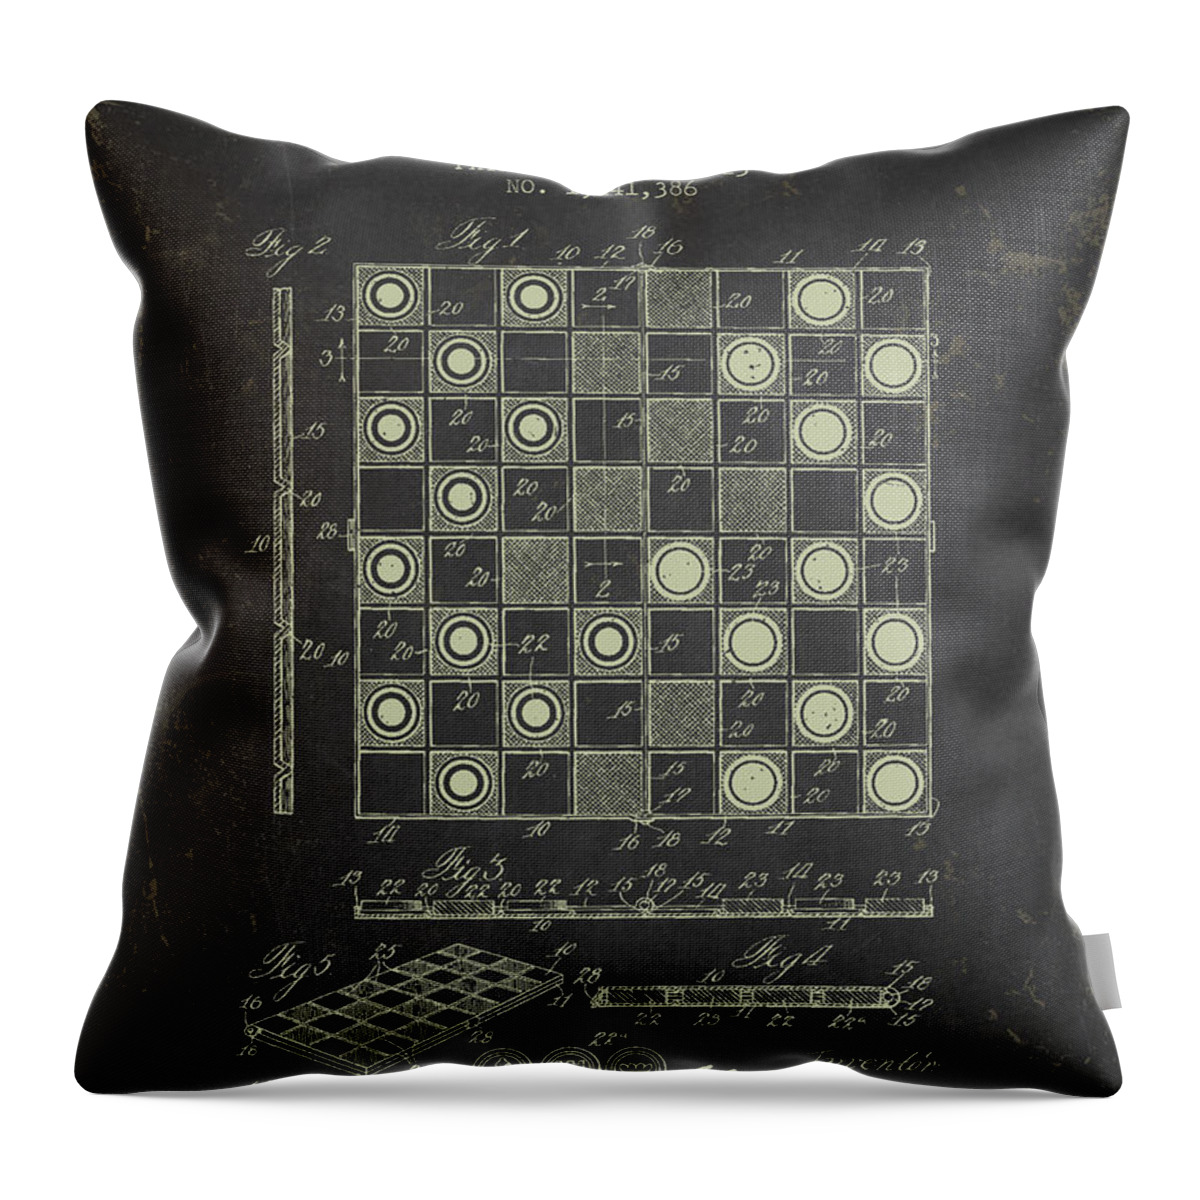 Patent Throw Pillow featuring the digital art 1923 Chess Board Patent - Dark Grunge by Aged Pixel